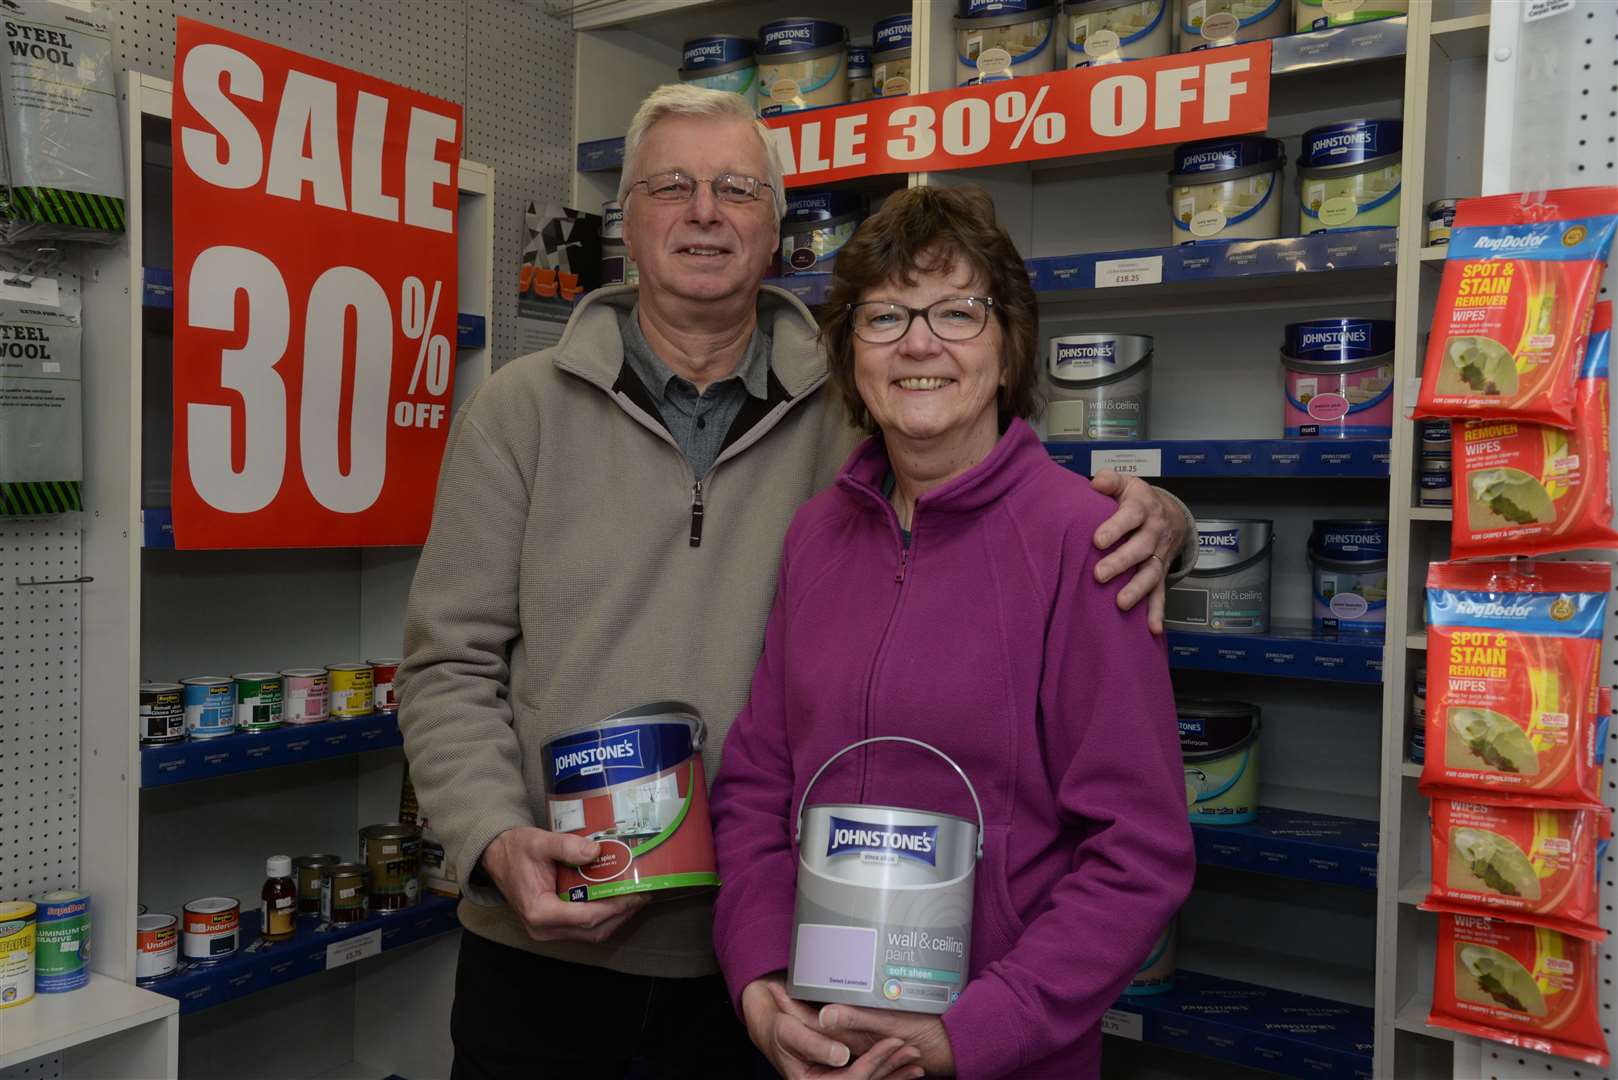 Alan and Penny Totham have run the shop for 27 years